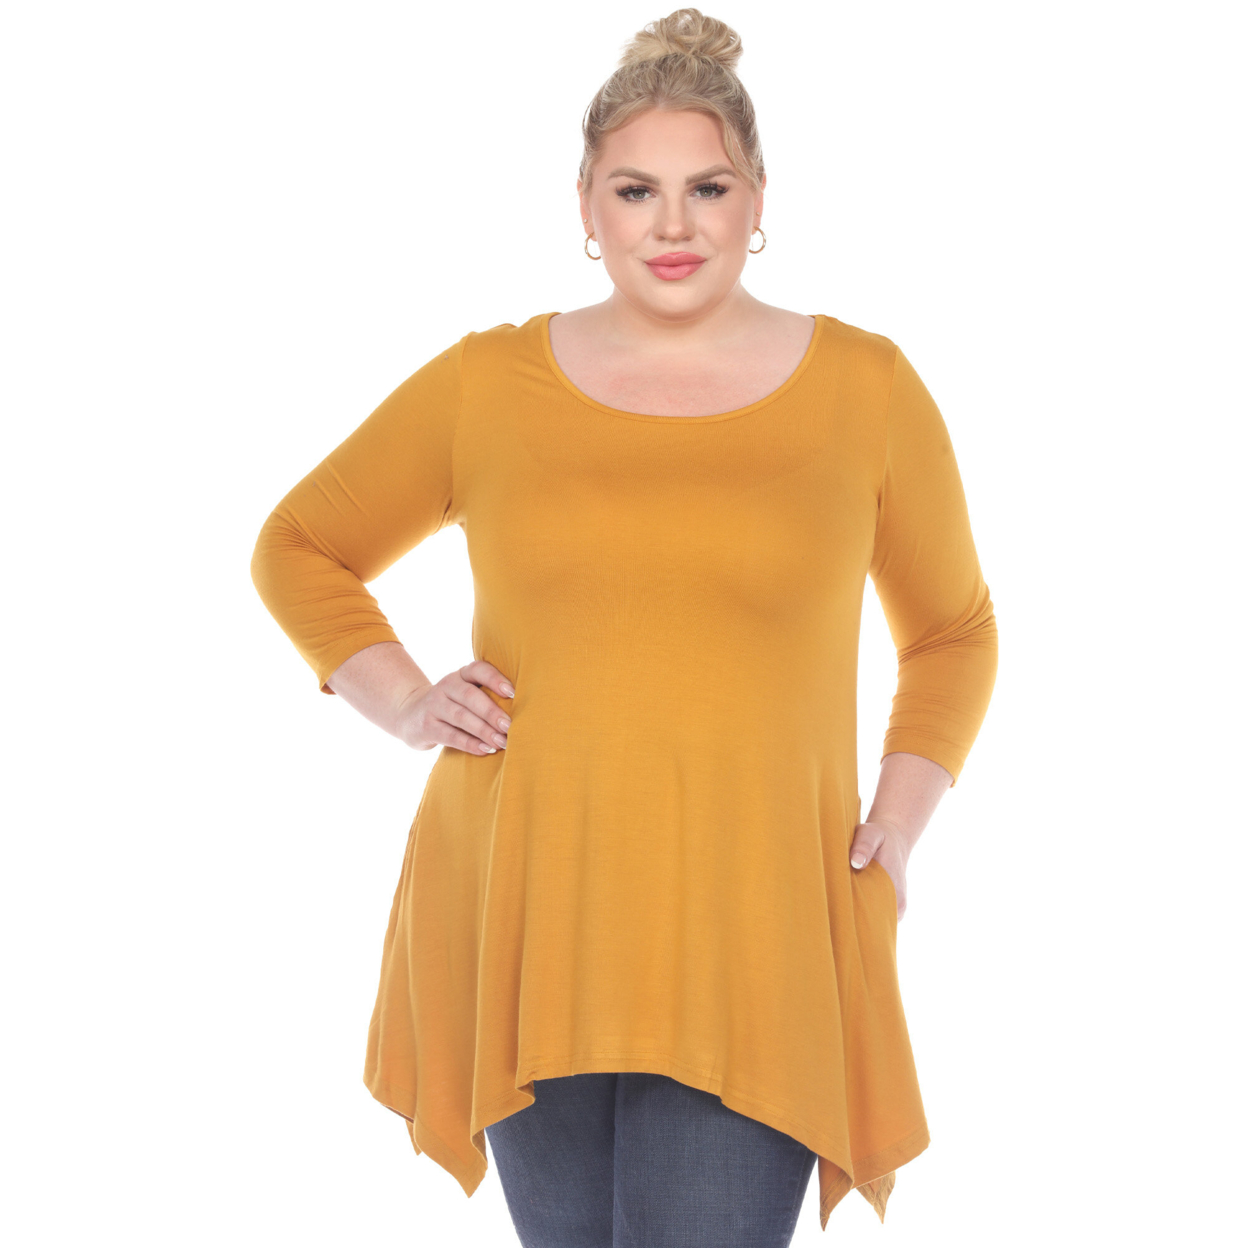 White Mark Women's Quarter Sleeve Tunic Top With Pockets - Mustard, Small